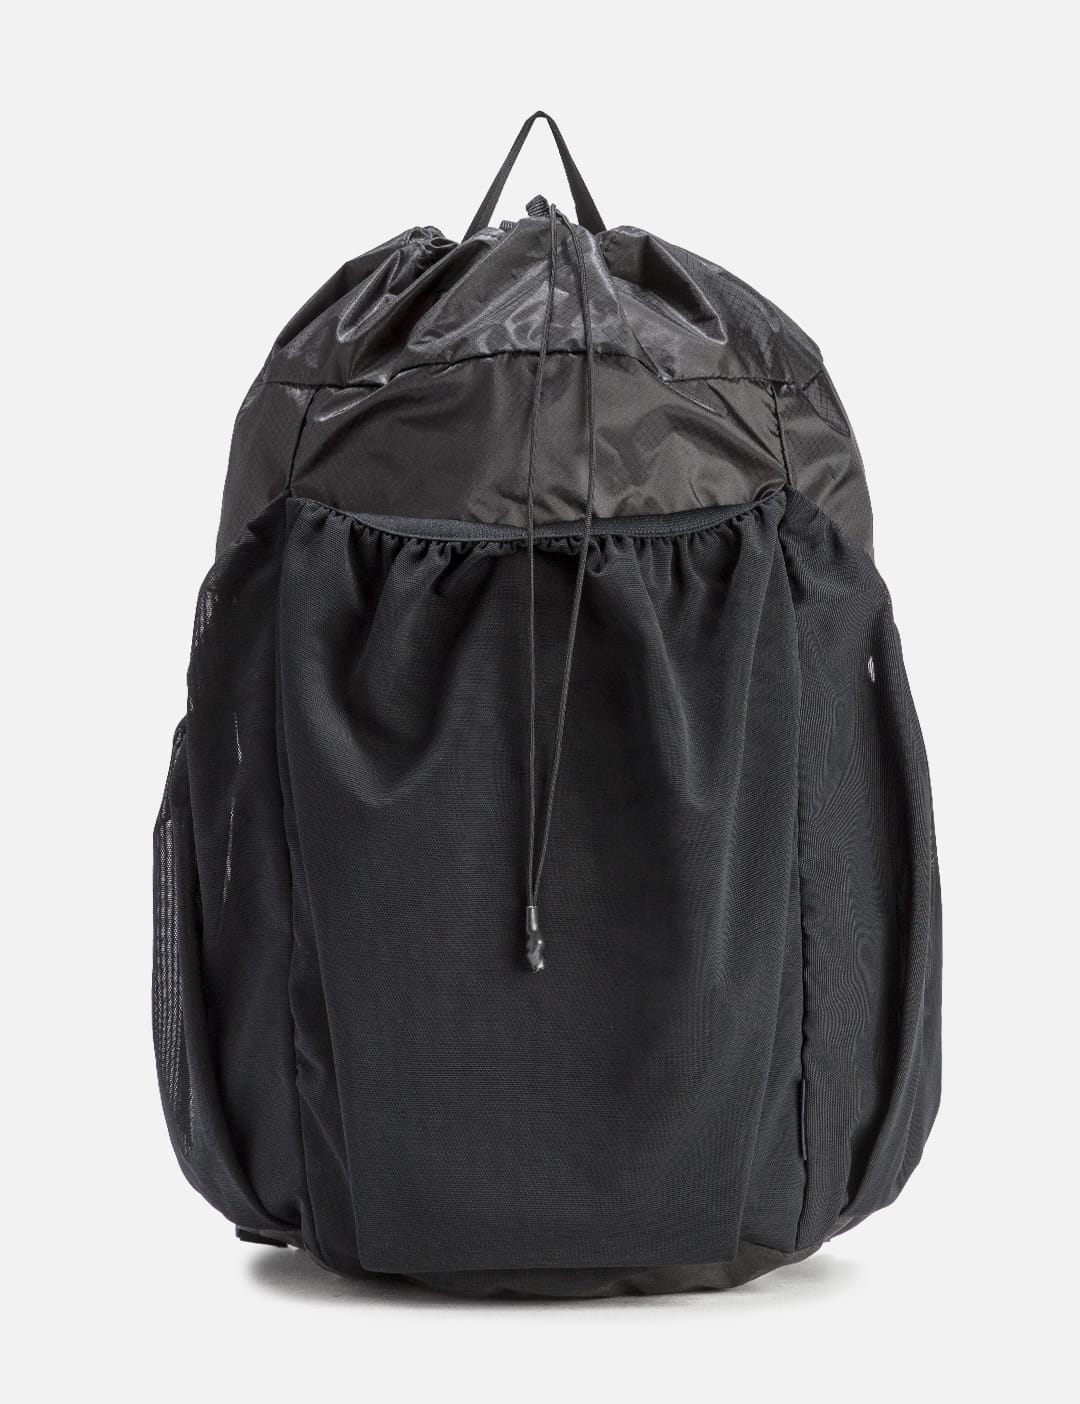 Meanswhile - CORDURA RIPSTOP Knapsack | HBX - Globally Curated